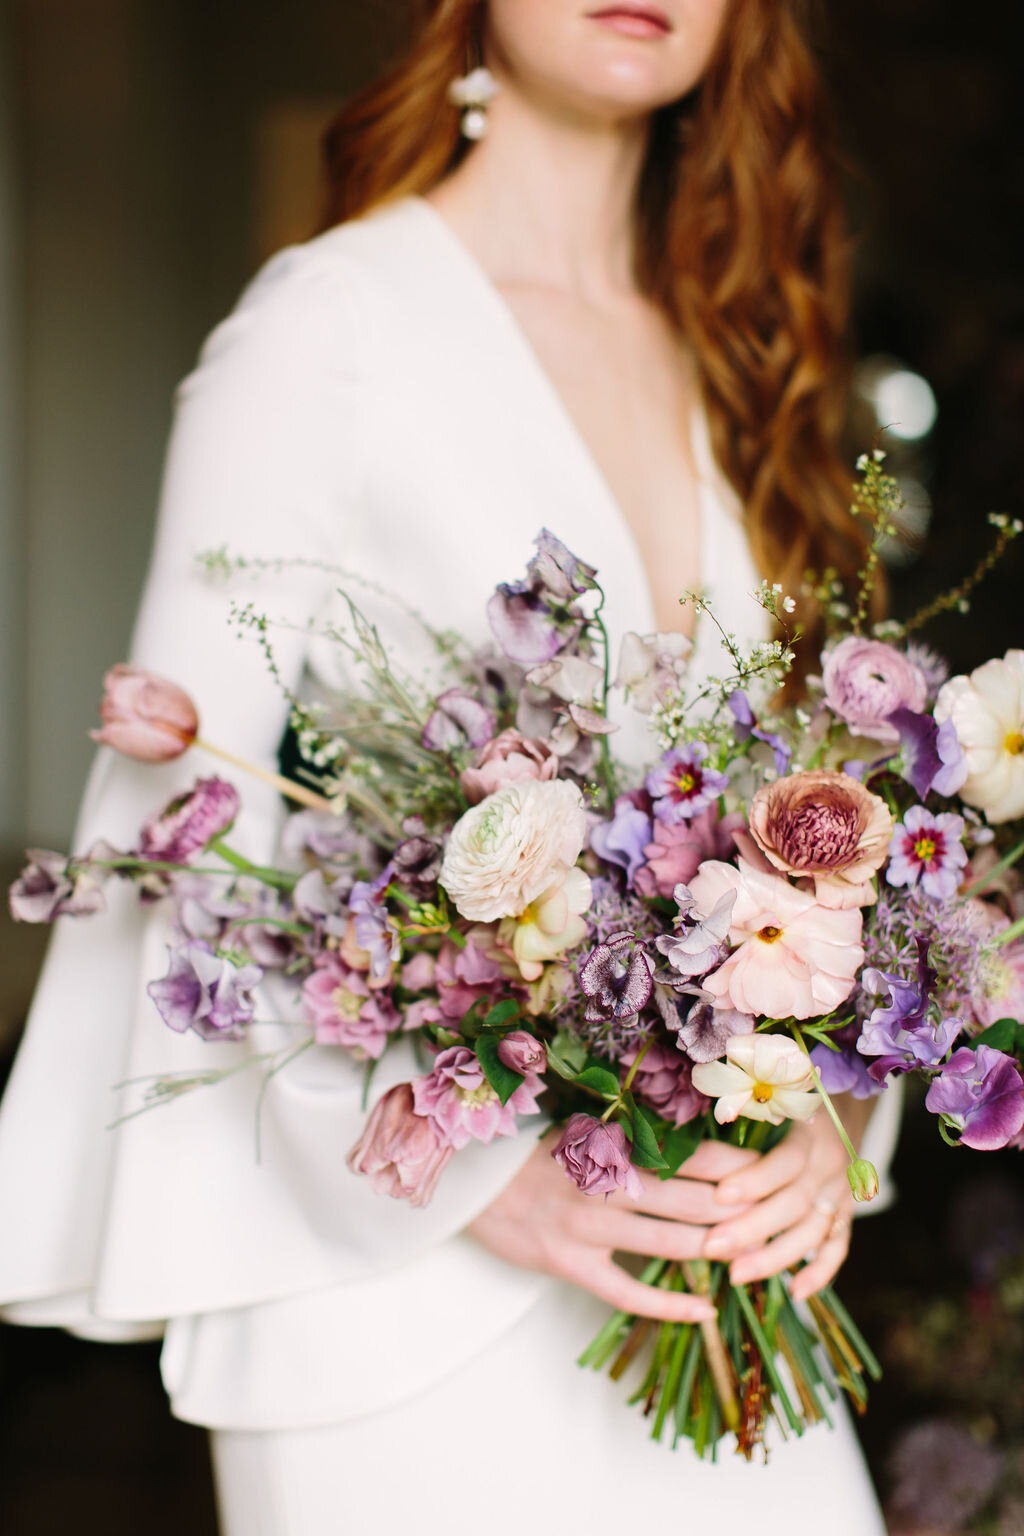 Whimsical purple bridal bouquet with delicate spring flowers like spirea, ranunculus, sweet peas, and tulips.